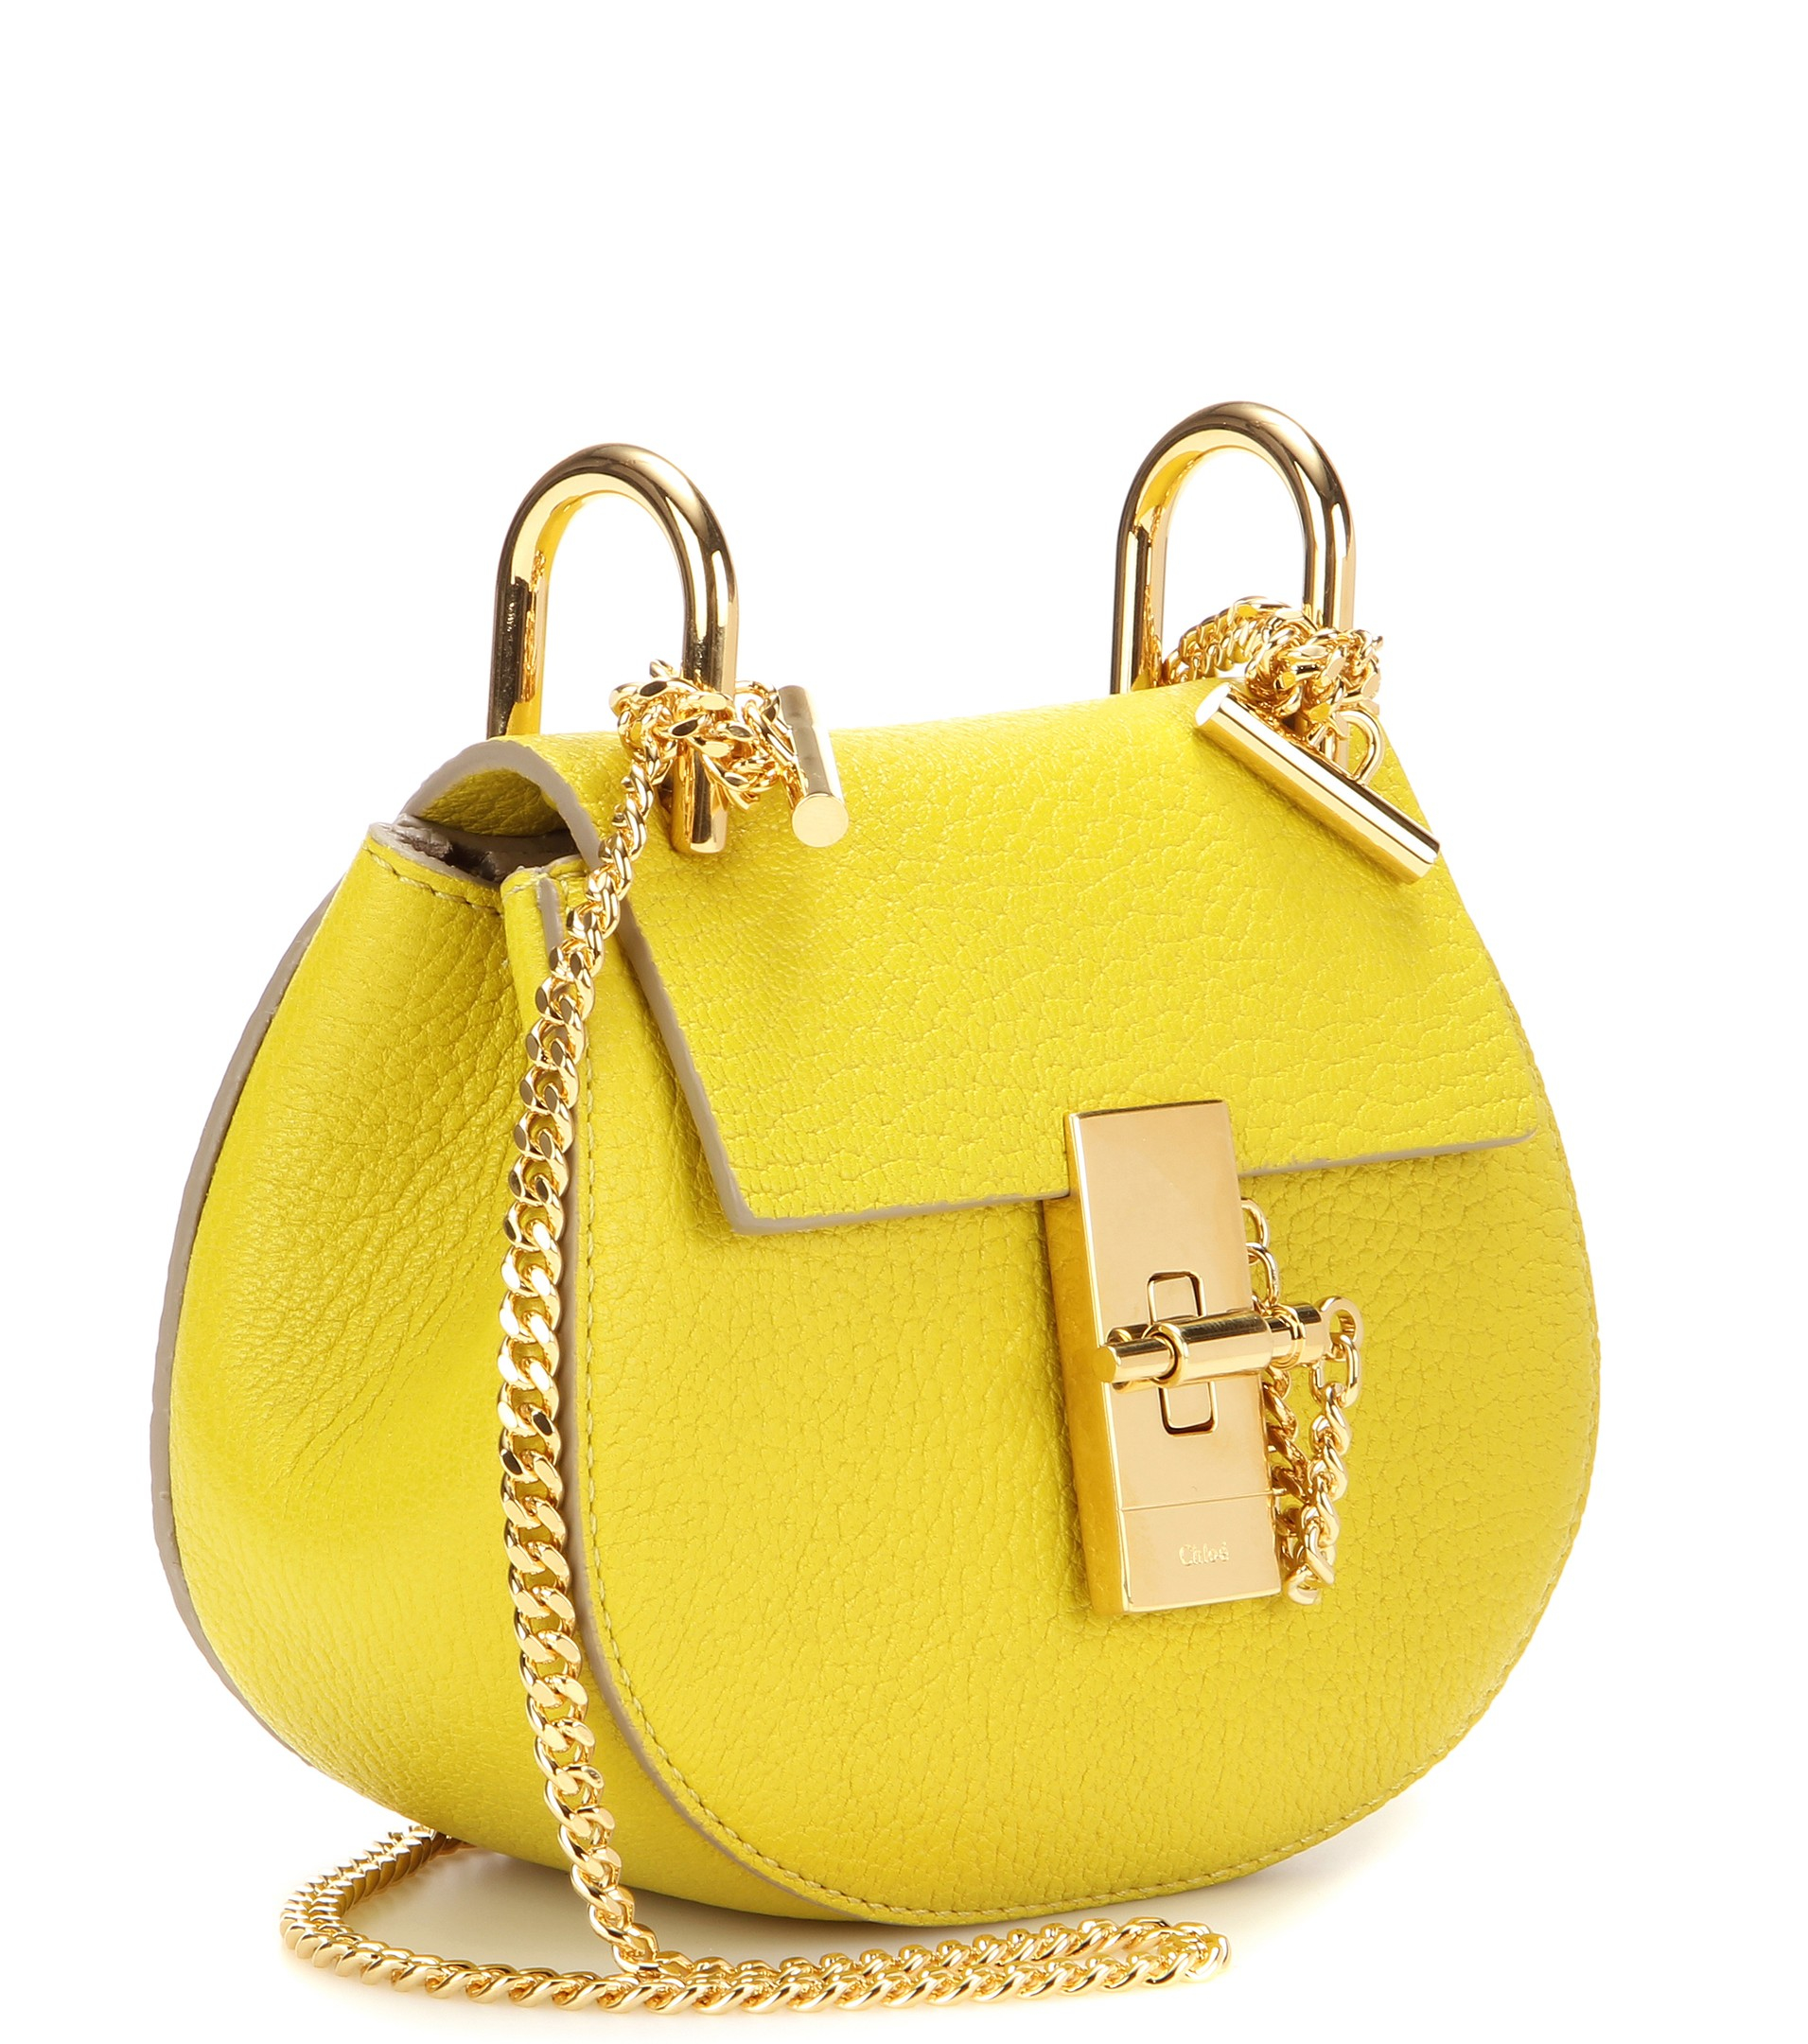 Chlo Nano Drew Leather Shoulder Bag in Yellow | Lyst